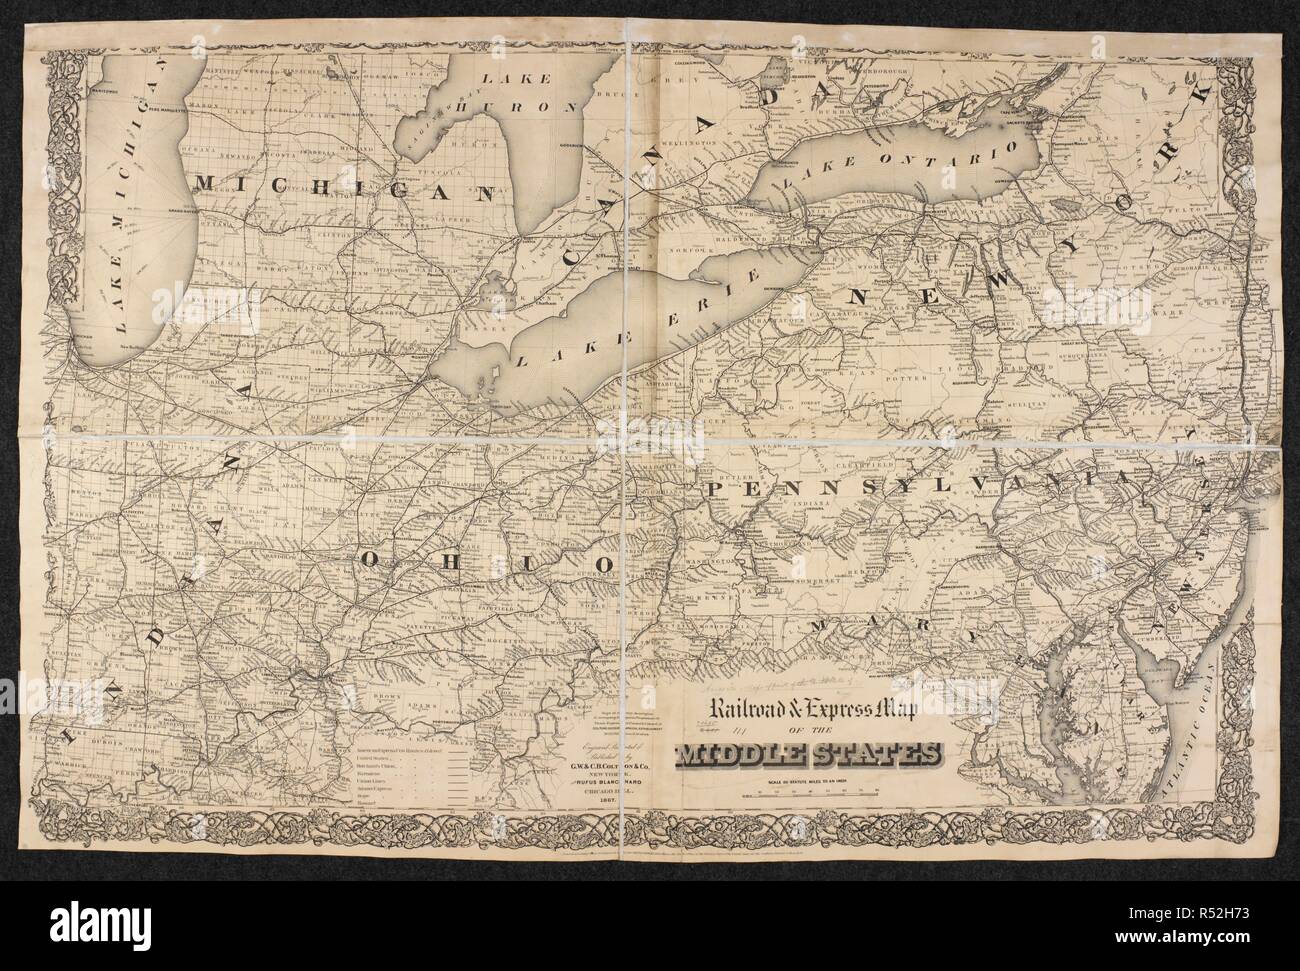 A railroad and express map of the Middle States of North America. Railroad & Express Map of the Middle States. Scale, 20 statute miles to an inch. R. Blanchard. Chicago, New York [printed], 1867. Source: Maps 71495.(111.). Language: English. Stock Photo